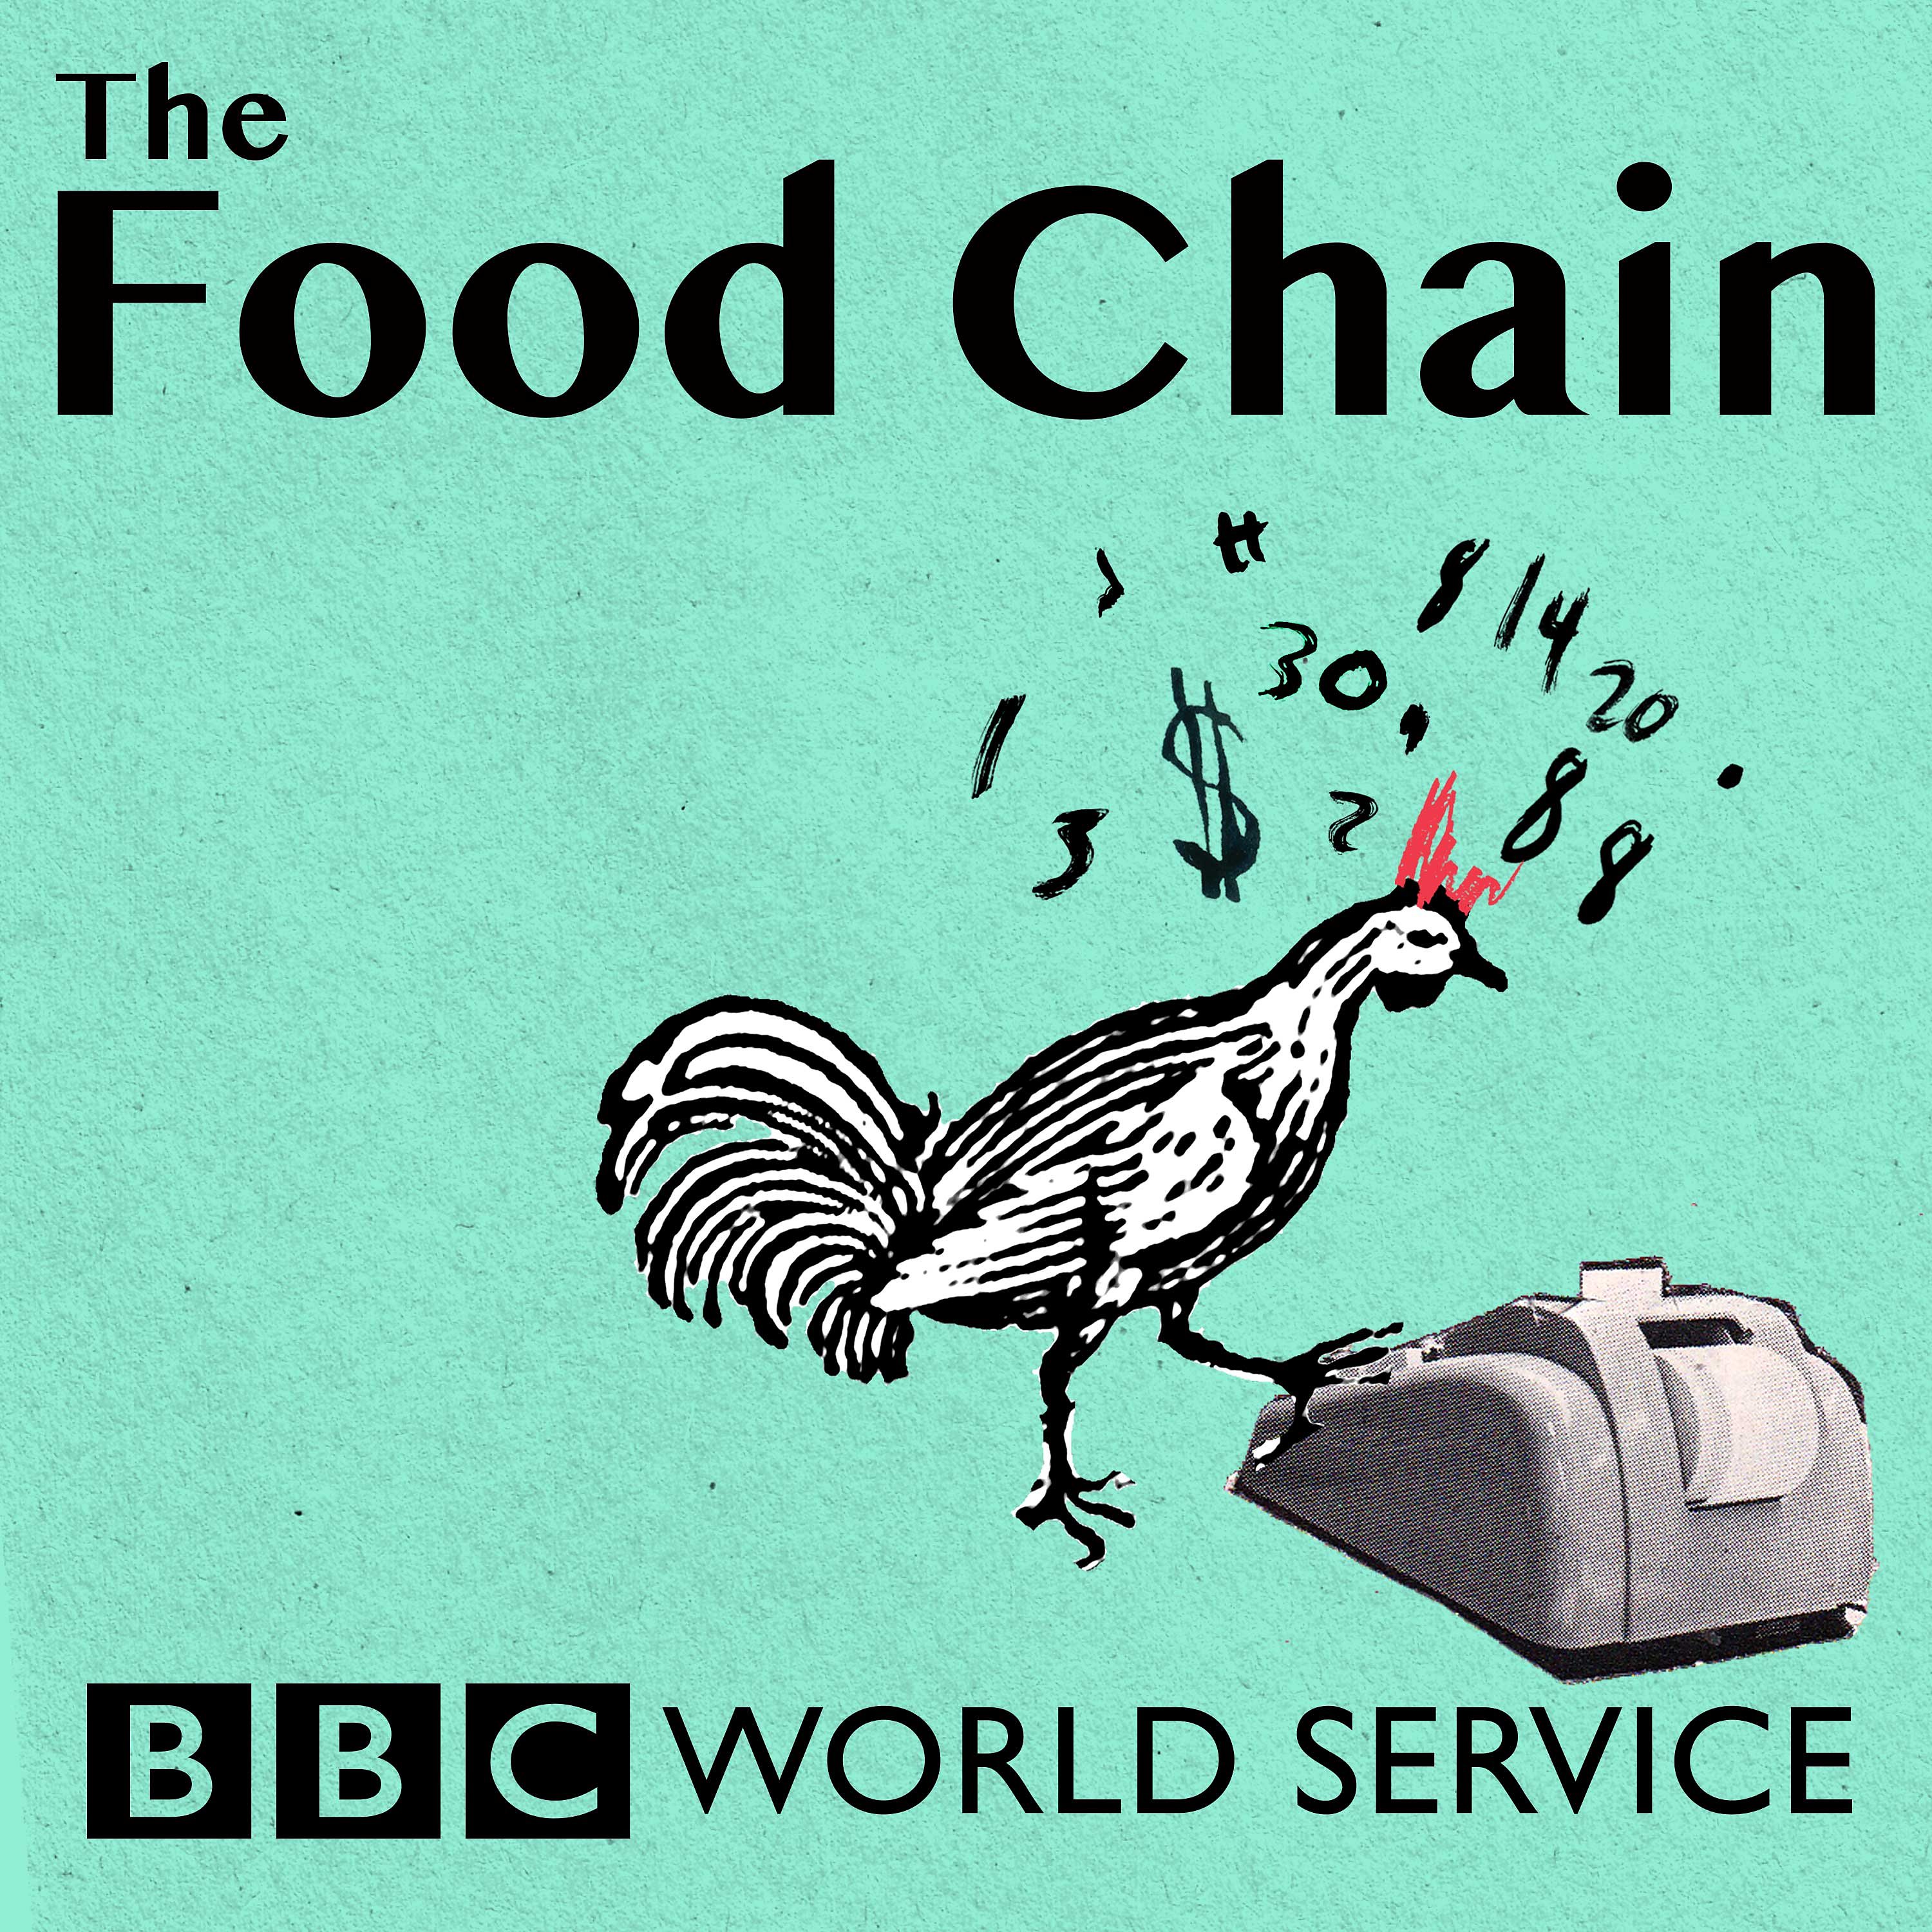 Food Waste: How Low Can it Go?